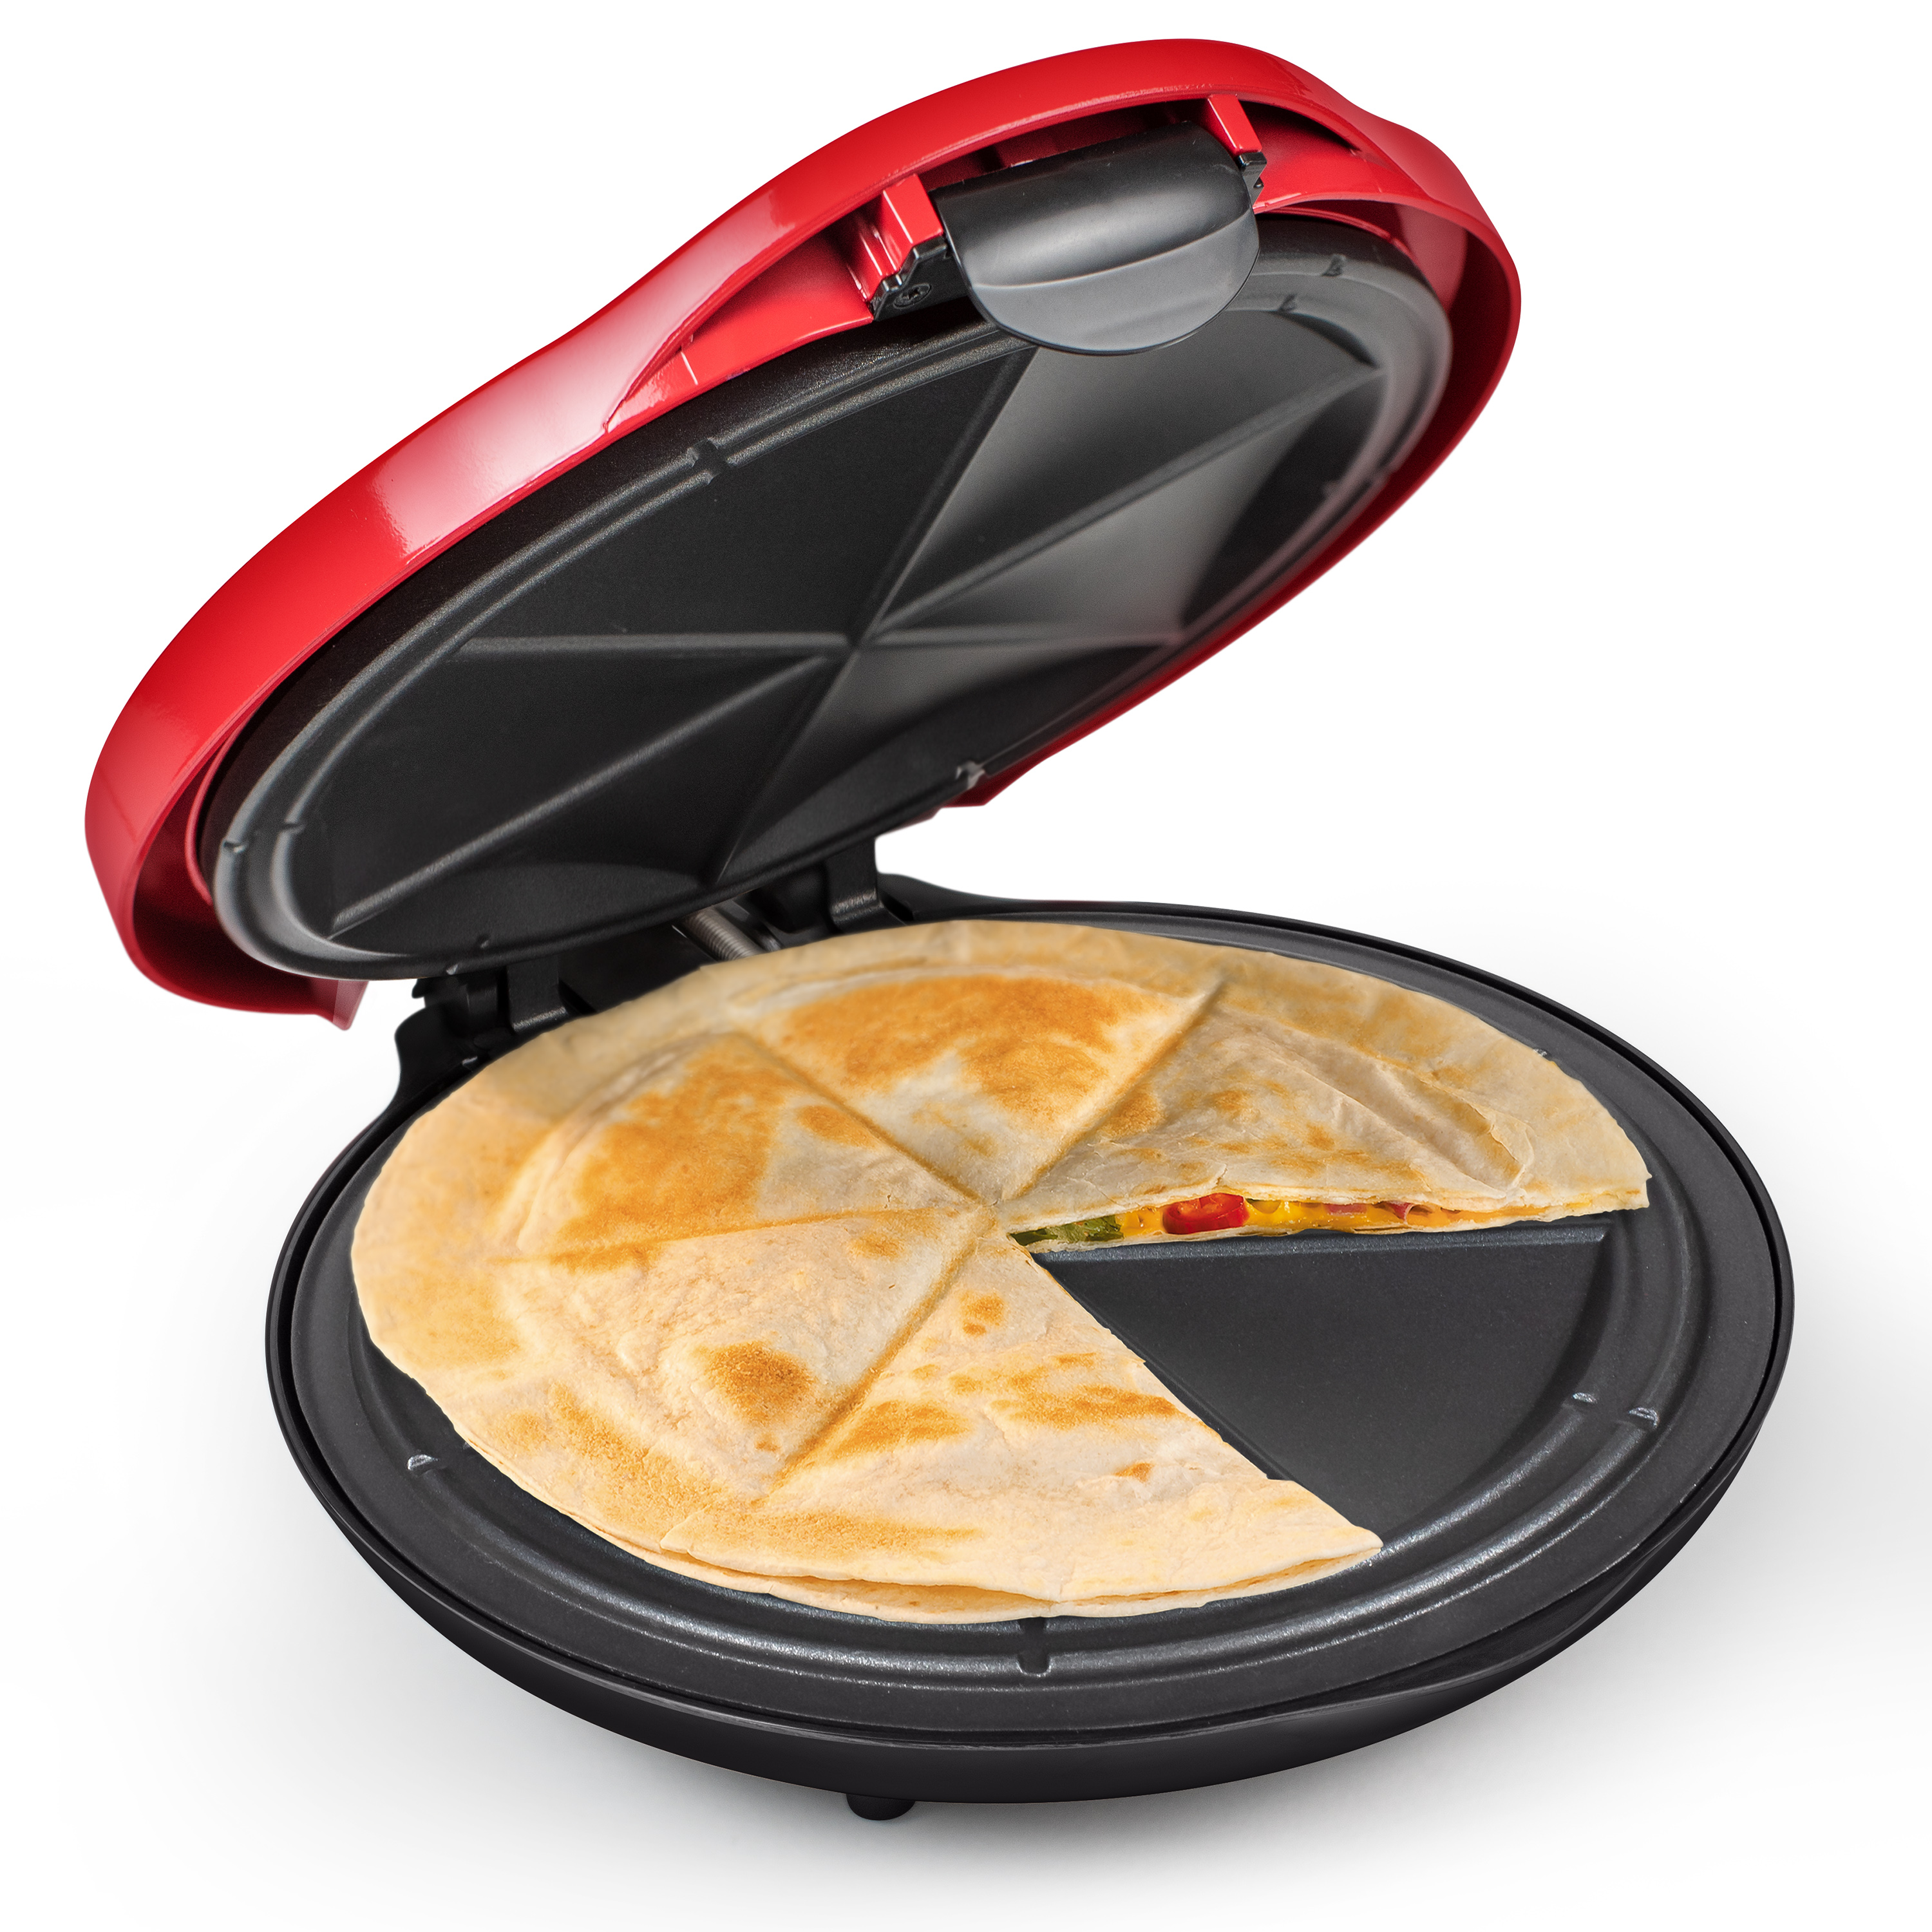 Taco Tuesday 6-Wedge Electric Quesadilla Maker with Extra Stuffing Latch, Red 10” - image 1 of 6